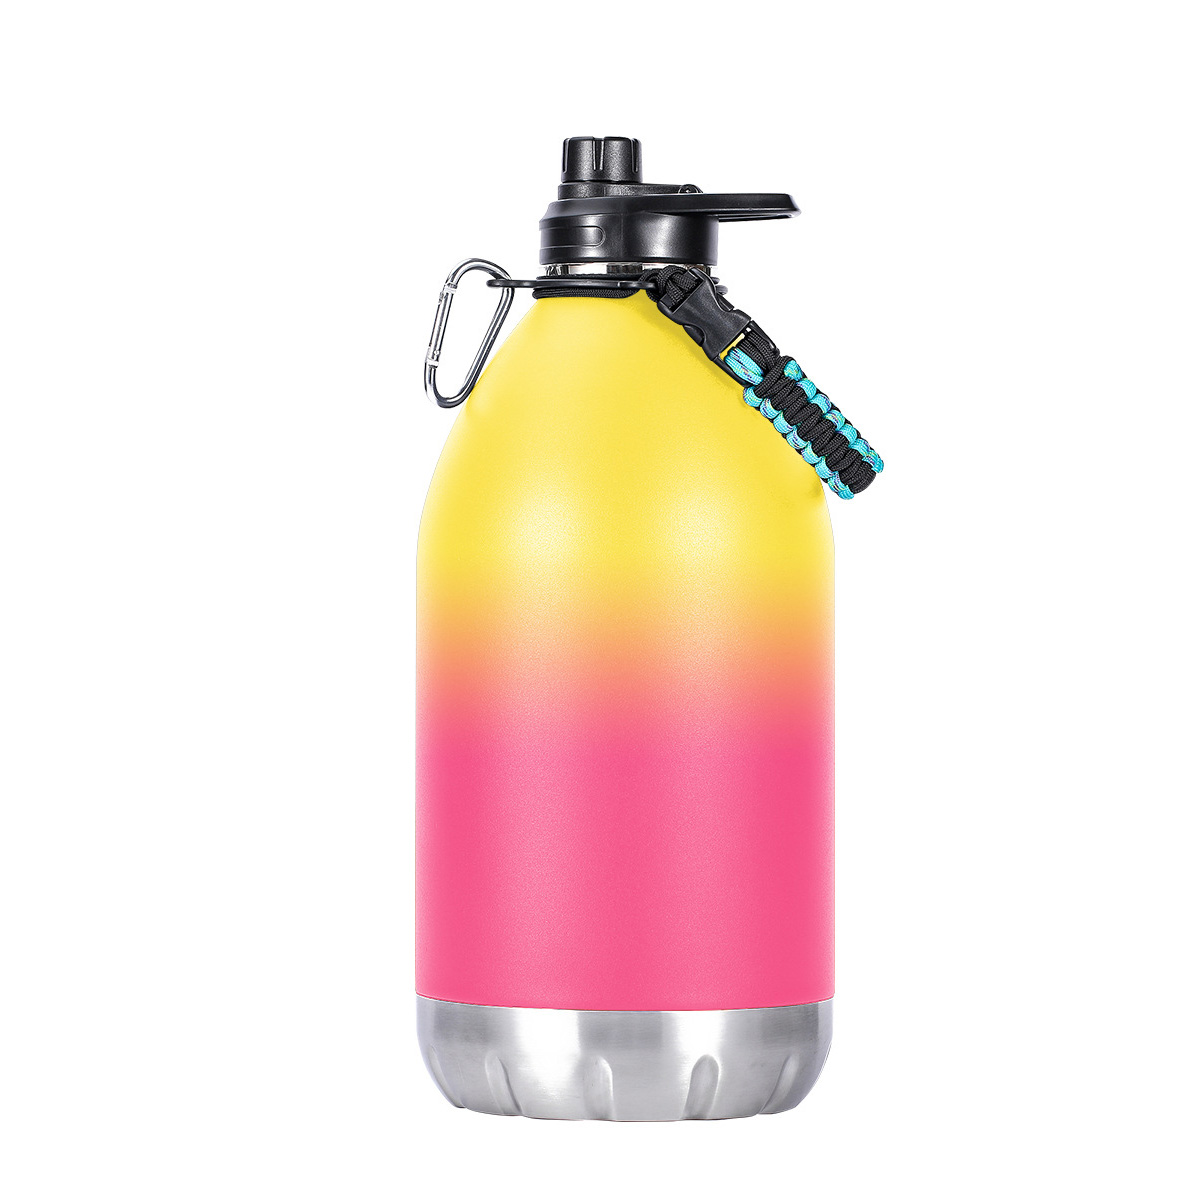 https://www.waterbottle.tech/wp-content/uploads/2021/11/large-capacity-water-bottle-1-gallon-3.8-liter-stainless-steel-insulated-growler-flask-s1112800-2.jpg